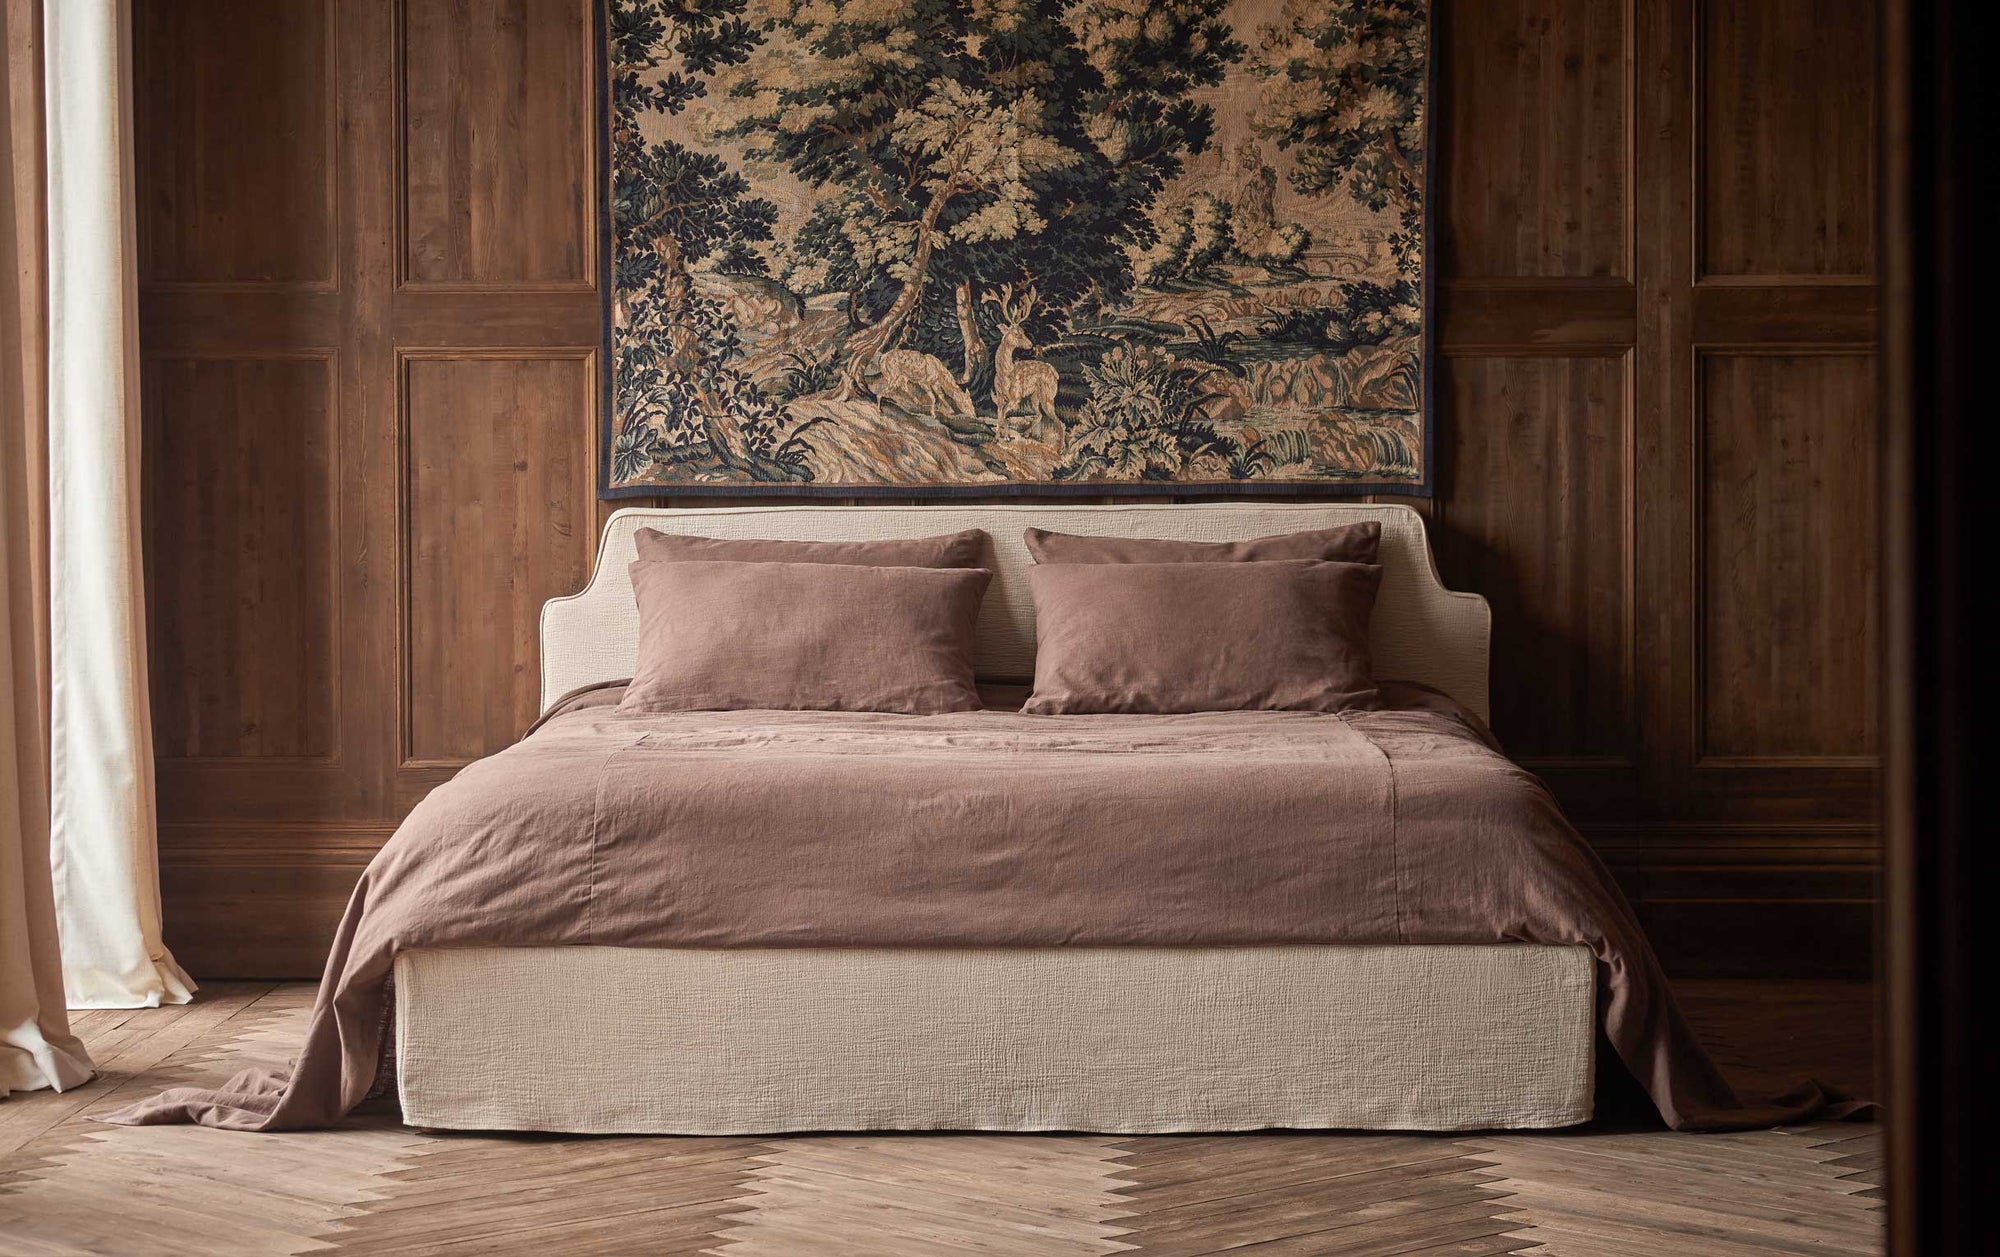 Amelia King Bed in Corn Silk, a light beige Washed Cotton Linen, made up in dusty mauve bedding, placed in a wood-paneled room with a large framed tapestry